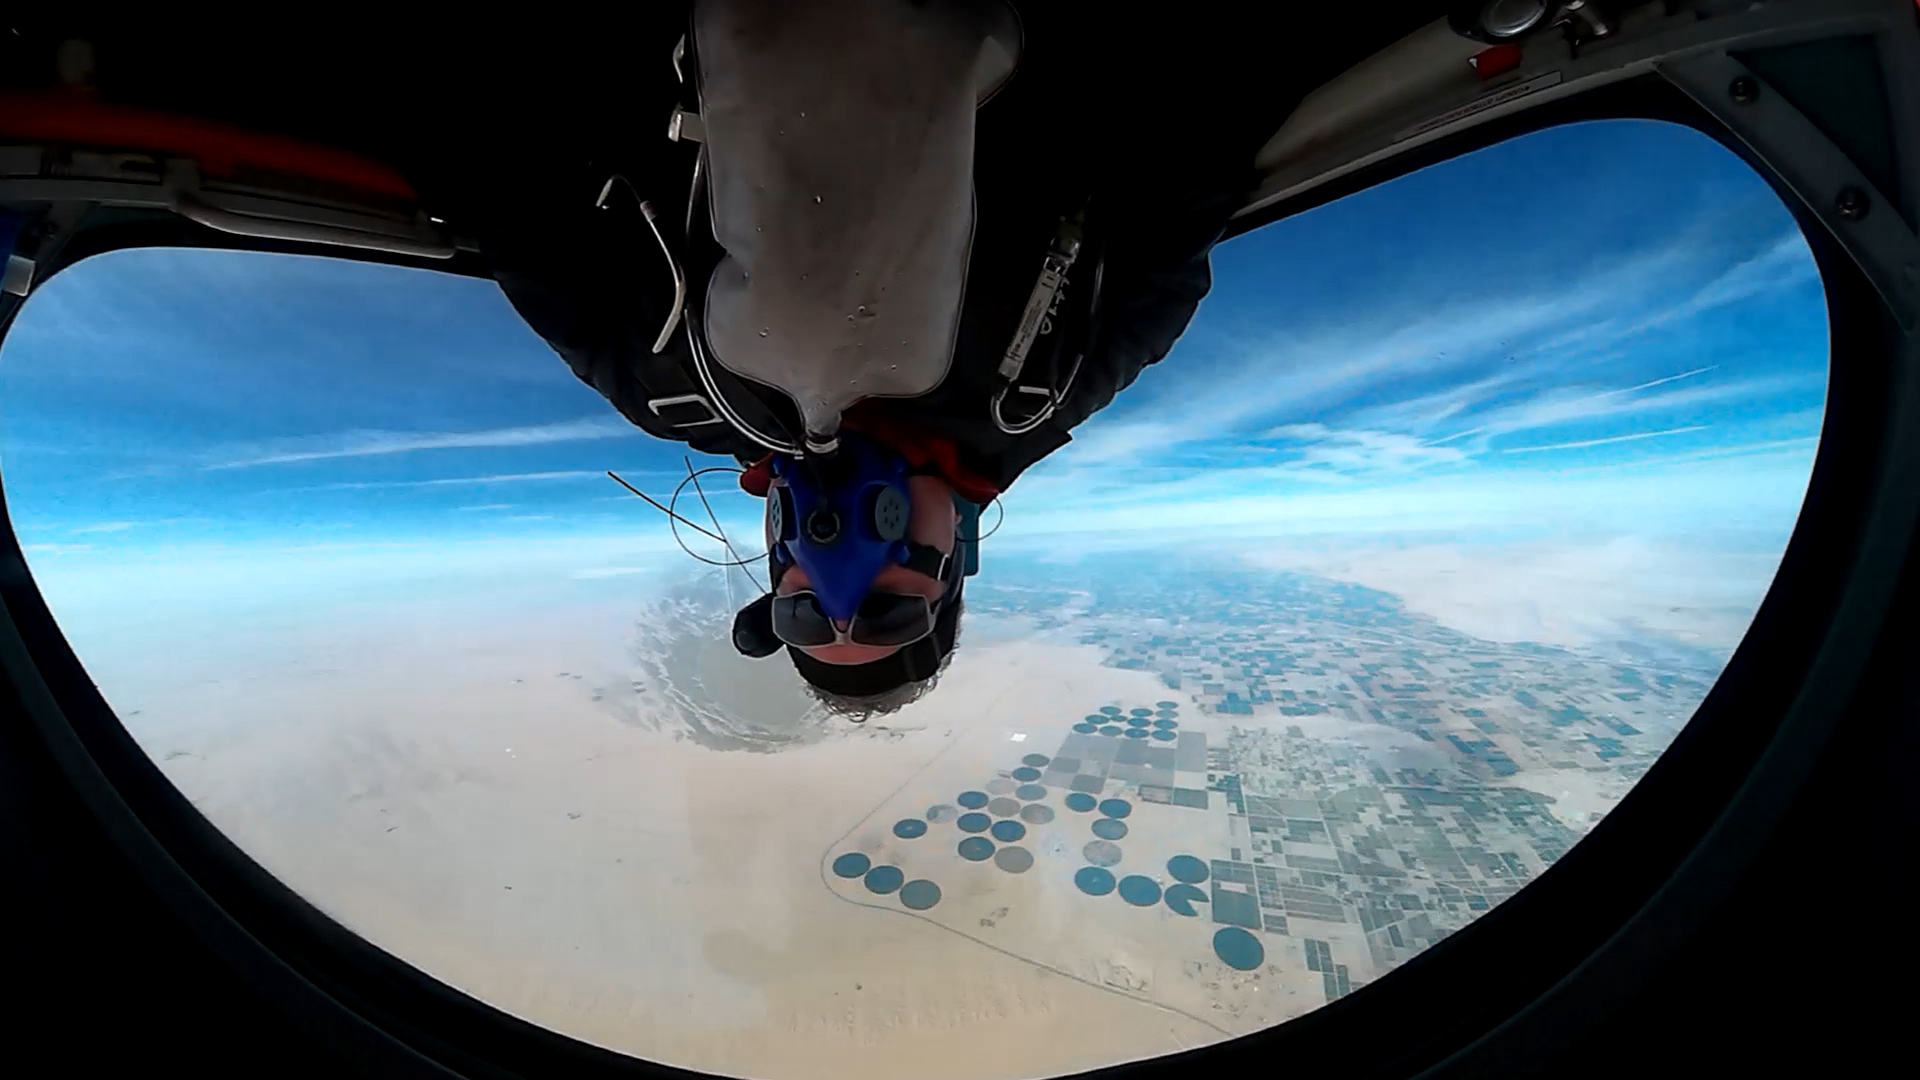 California airshow performer Spencer Suderman performs 98 inverted flat spins with a Sunbird S-1x in a world-record attempt from 24,500-feet March 20, 2016. Photo courtesy of Spencer Suderman.